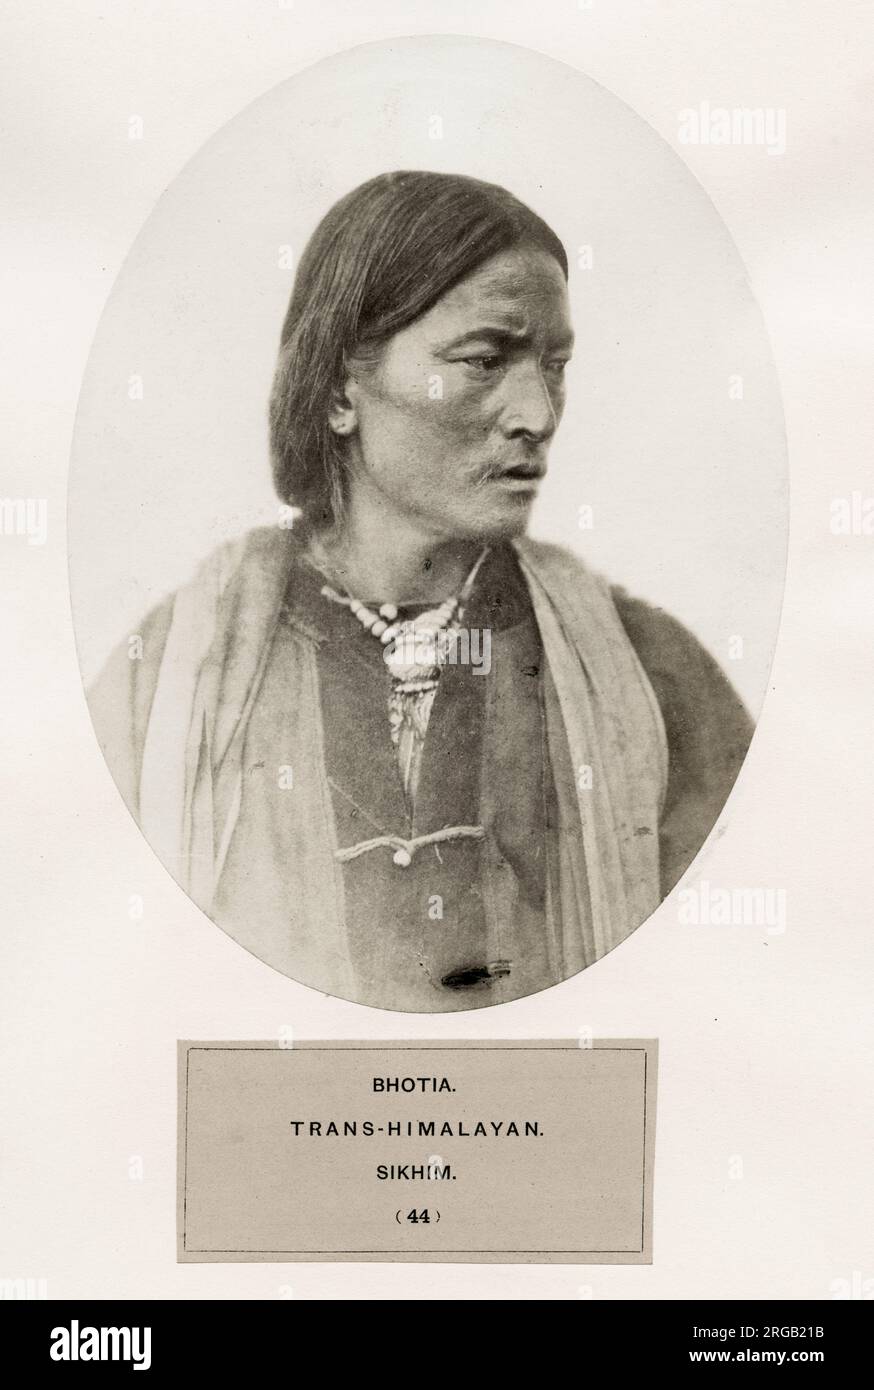 19th century vintage photograph - The People of India: A Series of Photographic Illustrations, with Descriptive Letterpress, of the Races and Tribes of Hindustan - published in the 1860s under order of the Viceroy, Lord Canning - Bhotia Bhutia, Trans-Himalayan, Sikhim. Stock Photo